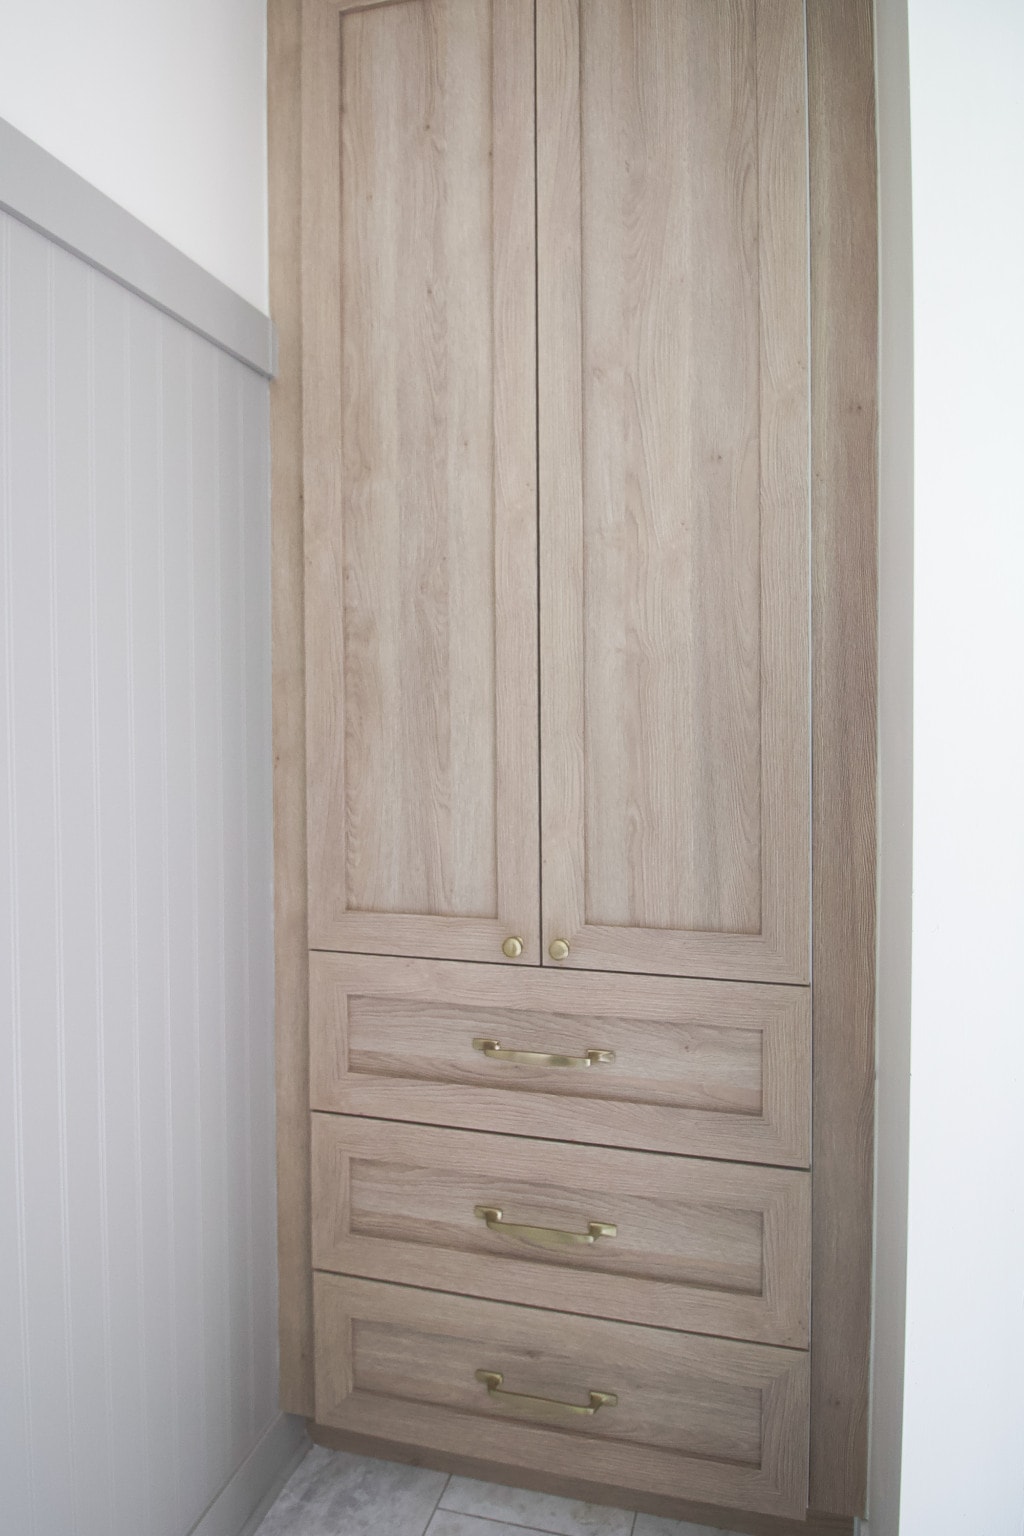 A look at our new built in linen cabinet